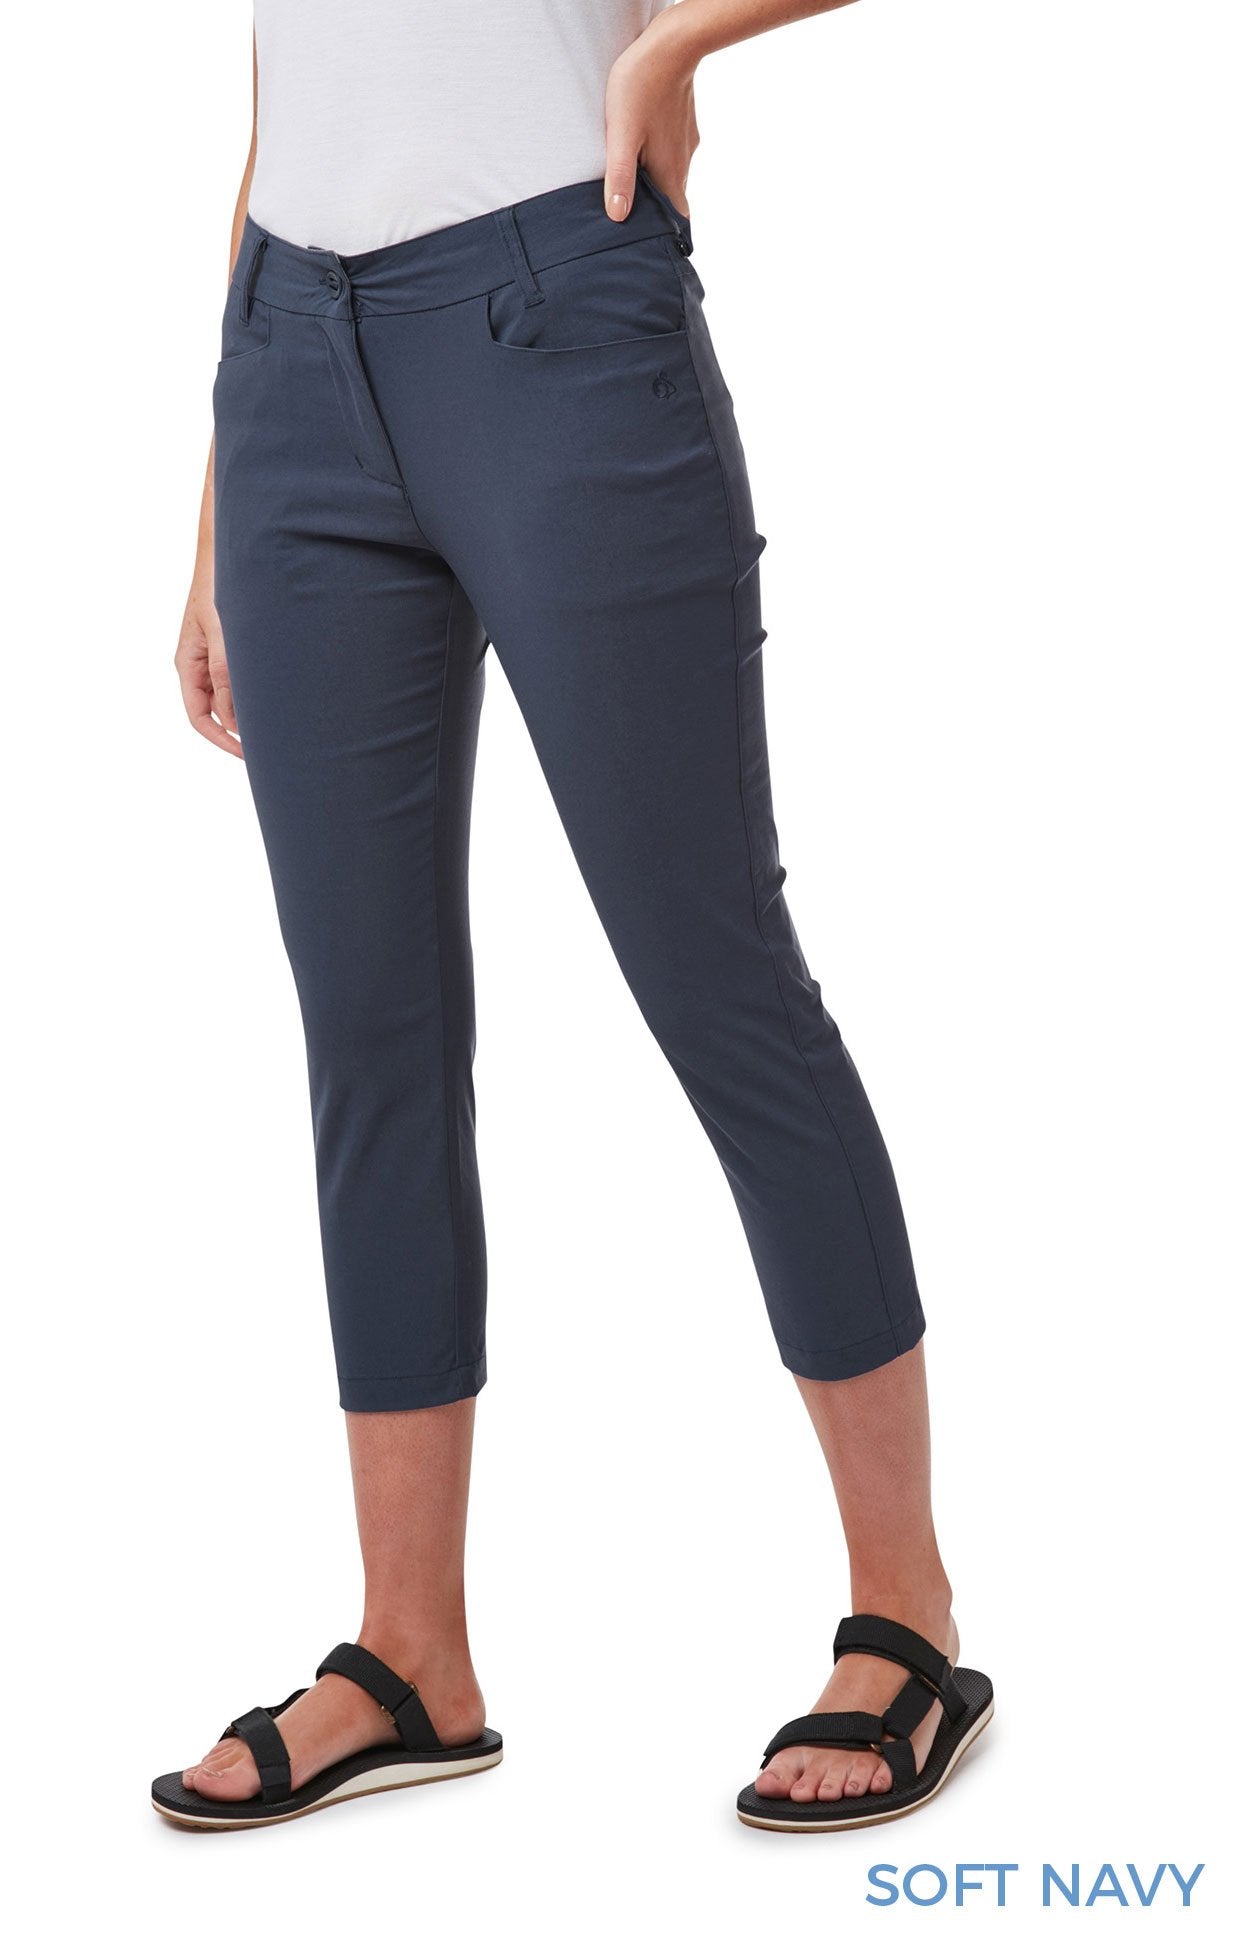 Soft Navy Ladies Clara NosiLife Crop Pants by Craghoppers